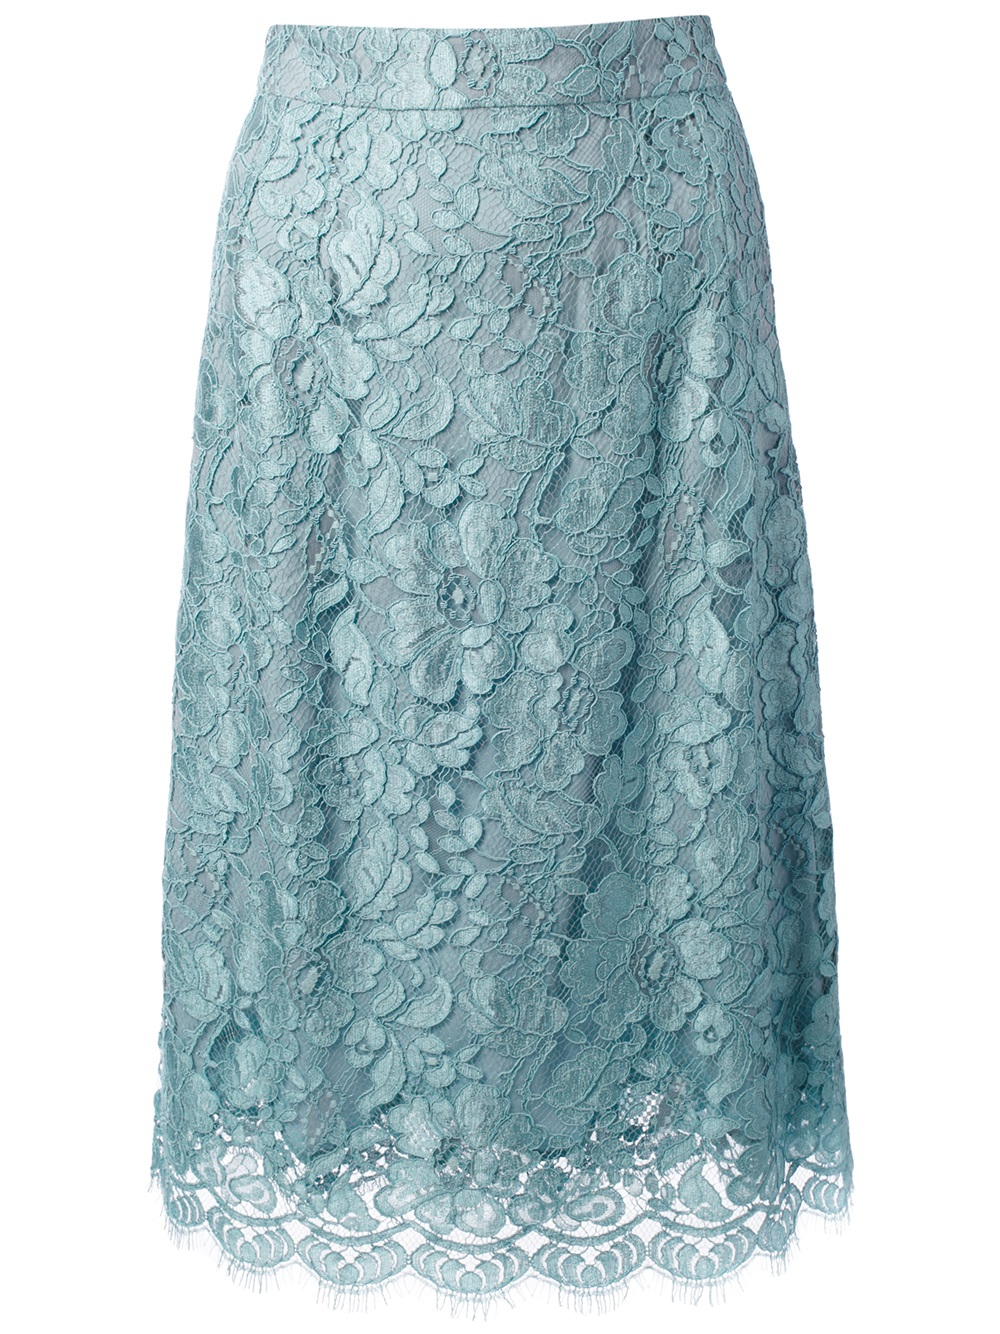 Lyst - Dolce & gabbana Floral Lace Skirt in Blue